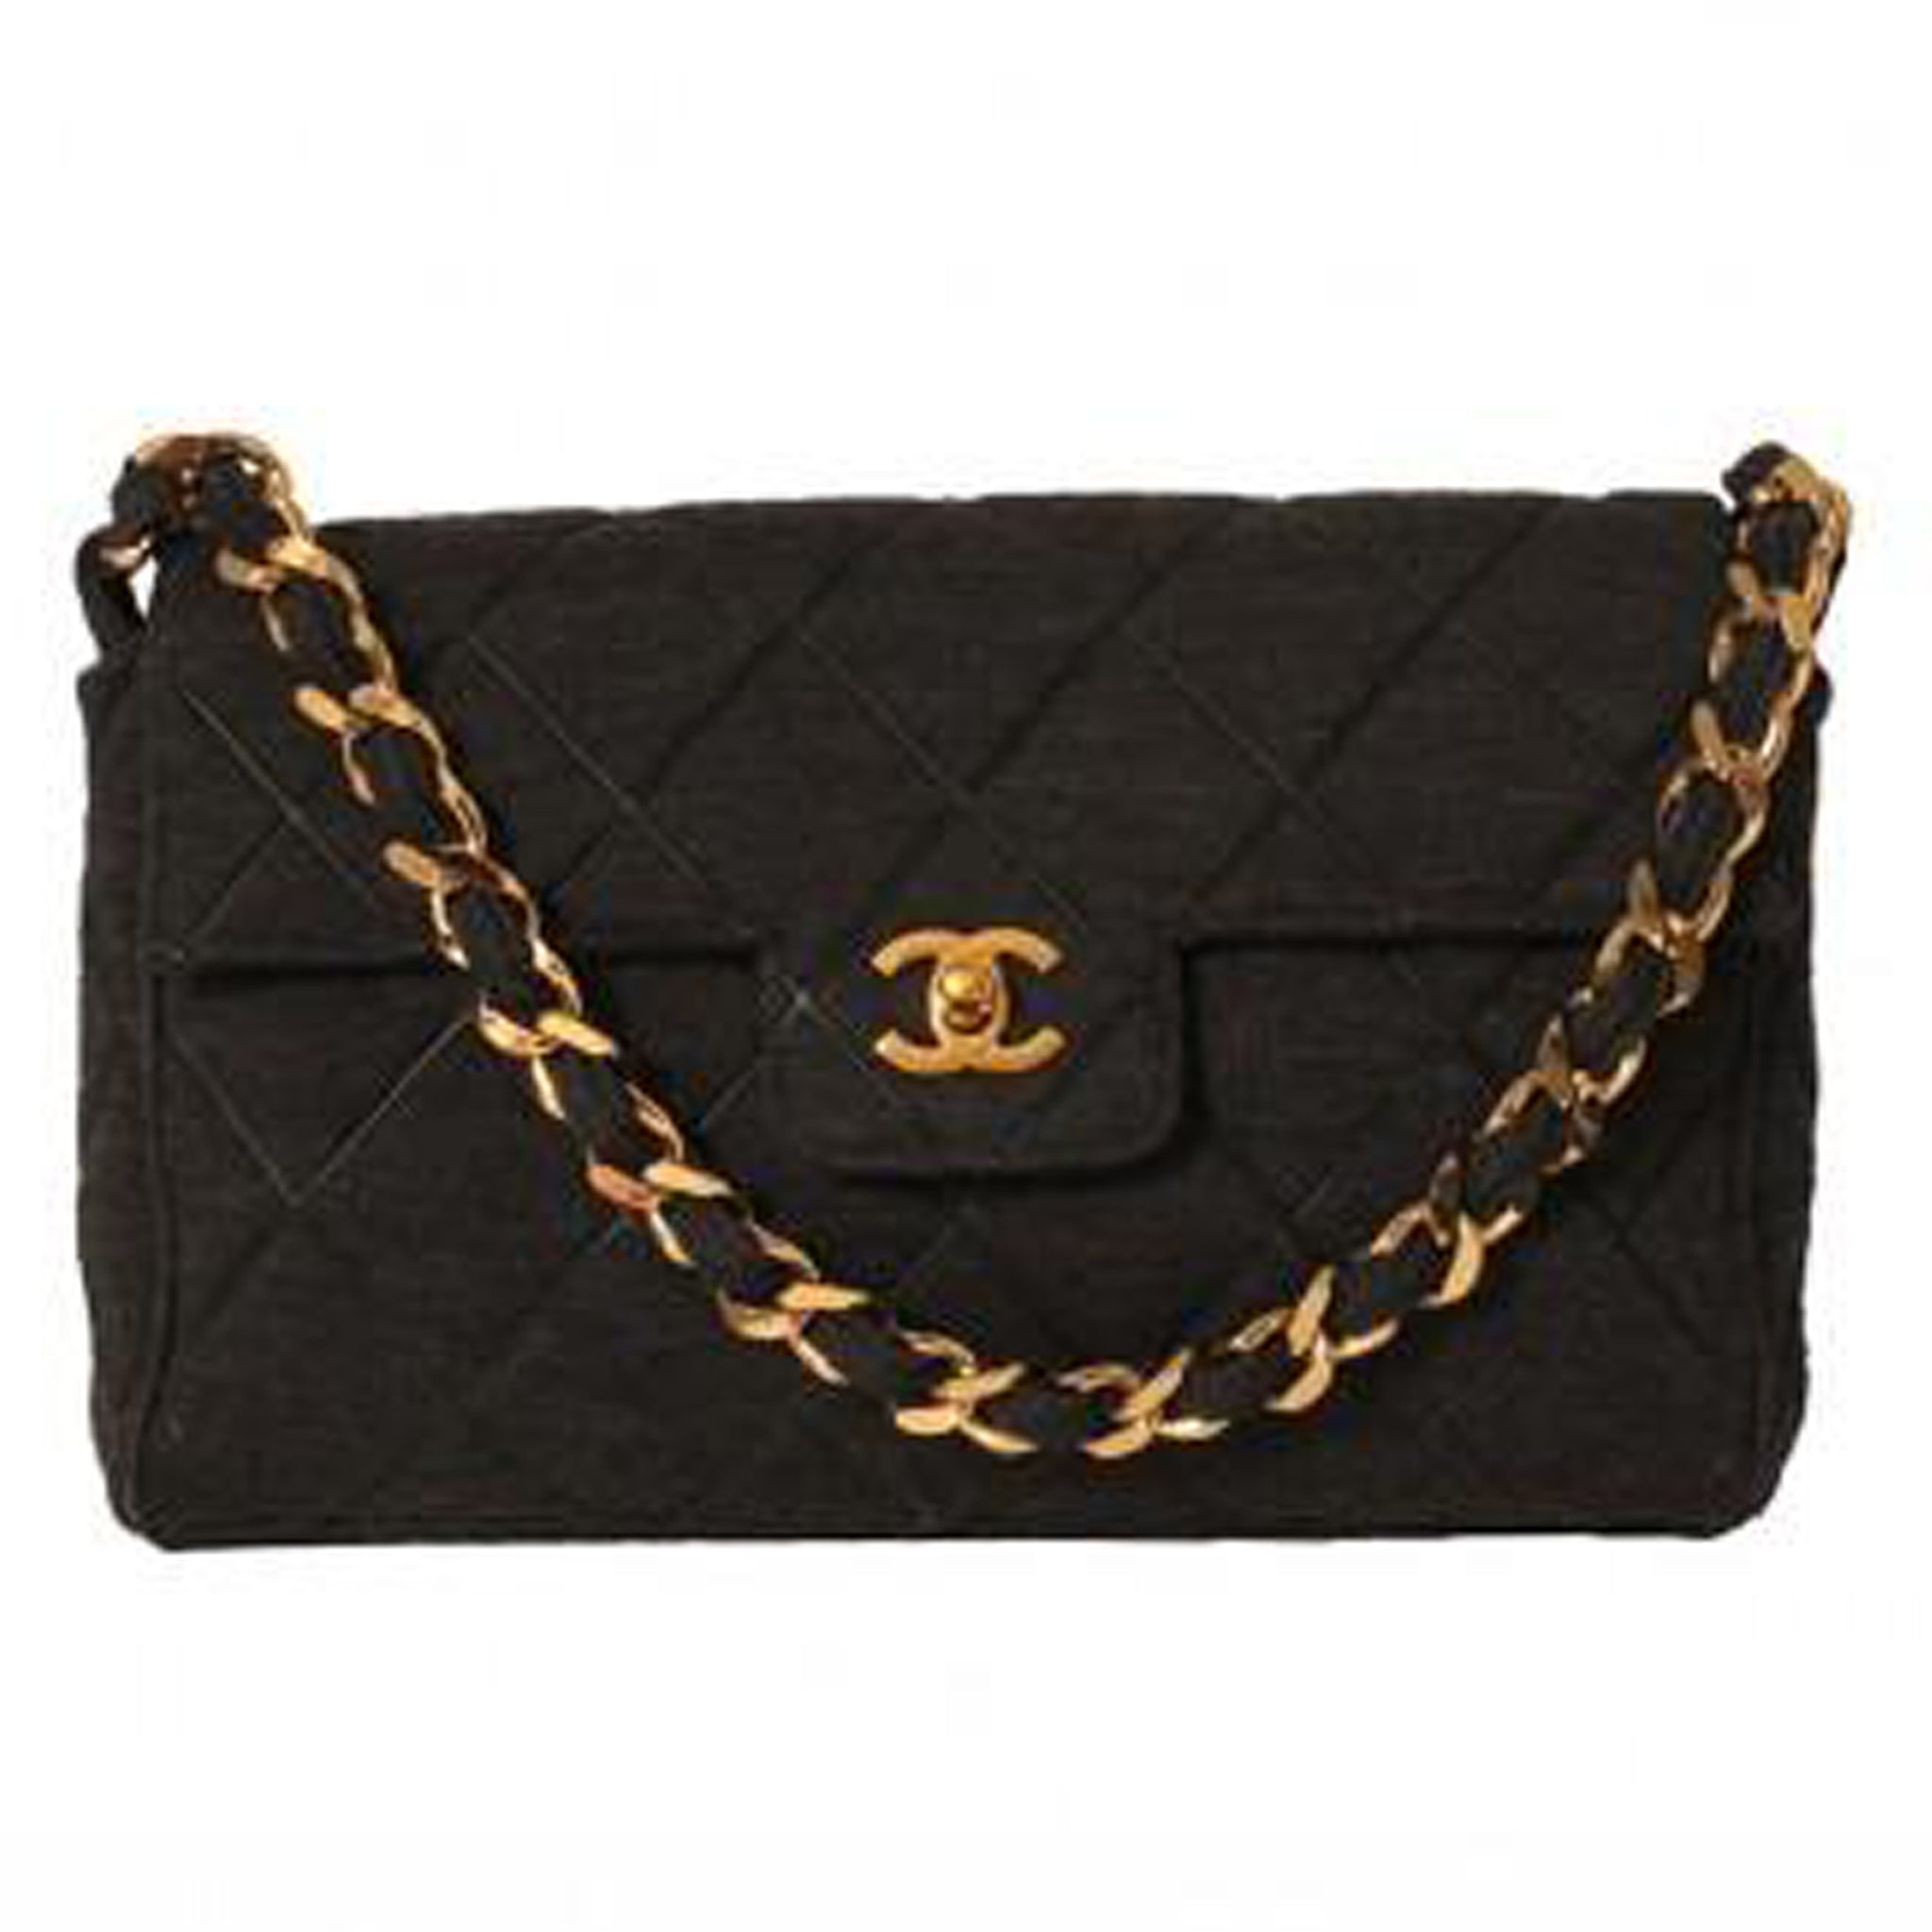 GREY WOOL FABRIC WITH GOLDTONE METAL CLASSIC SHOULDER BAG CHANEL  A  Collection of a Lifetime Chanel Online  Jewellery  Sothebys